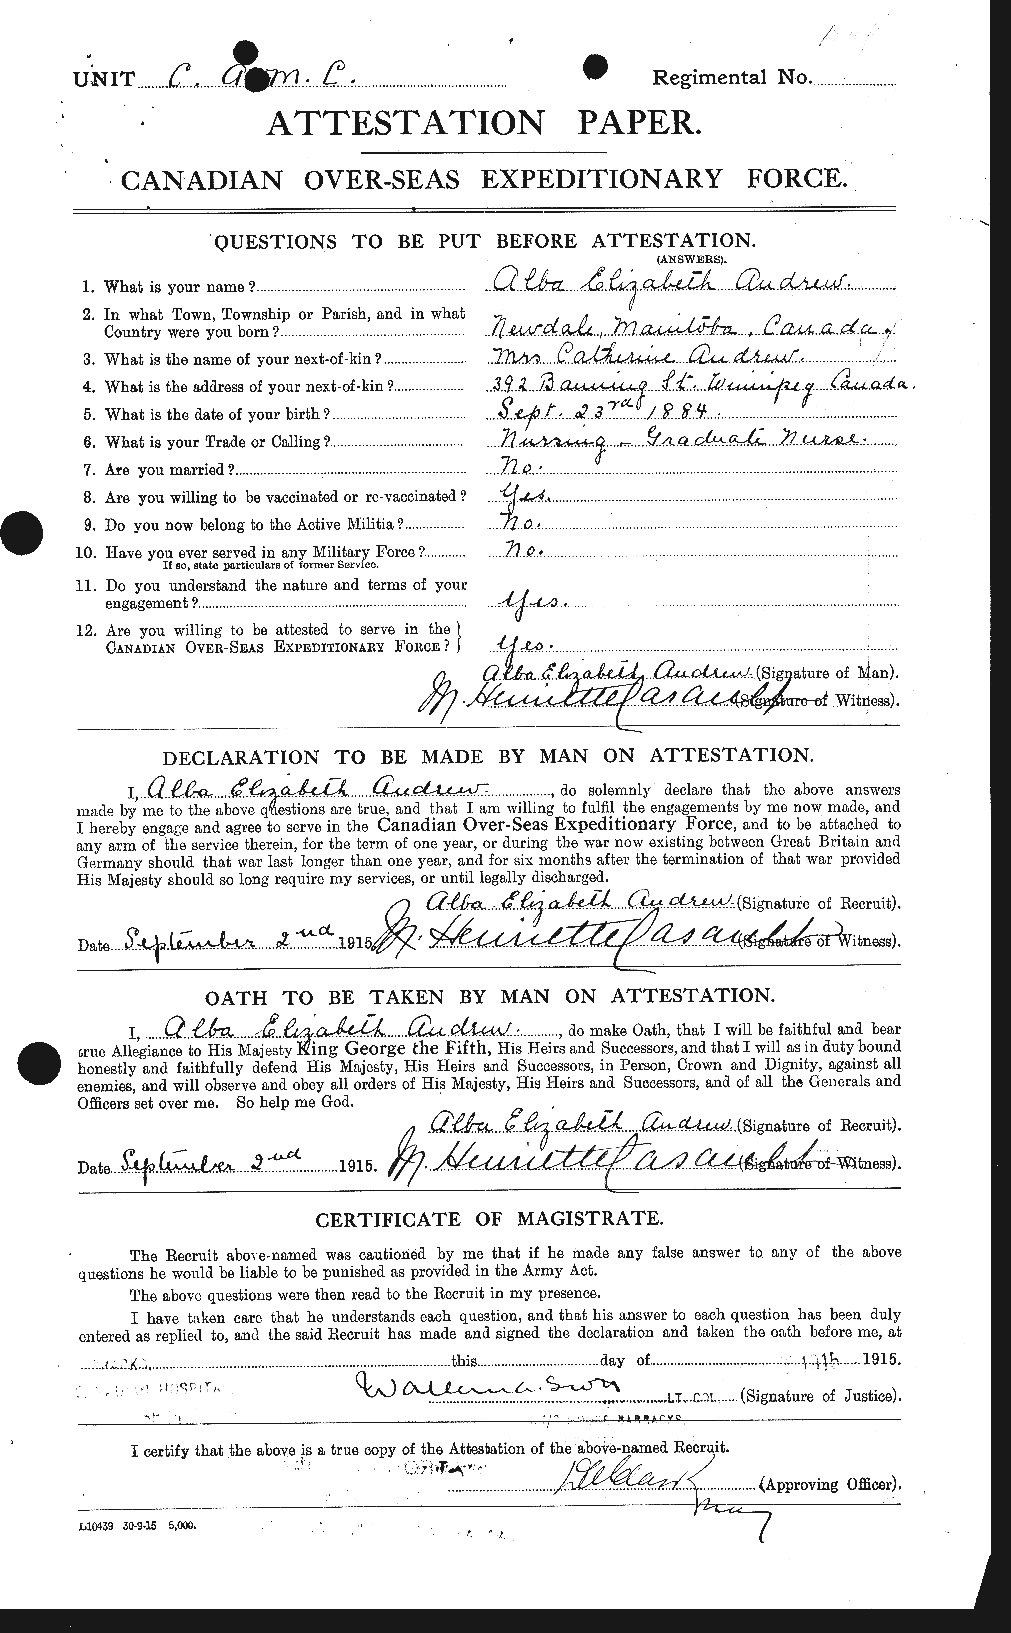 Personnel Records of the First World War - CEF 210940a